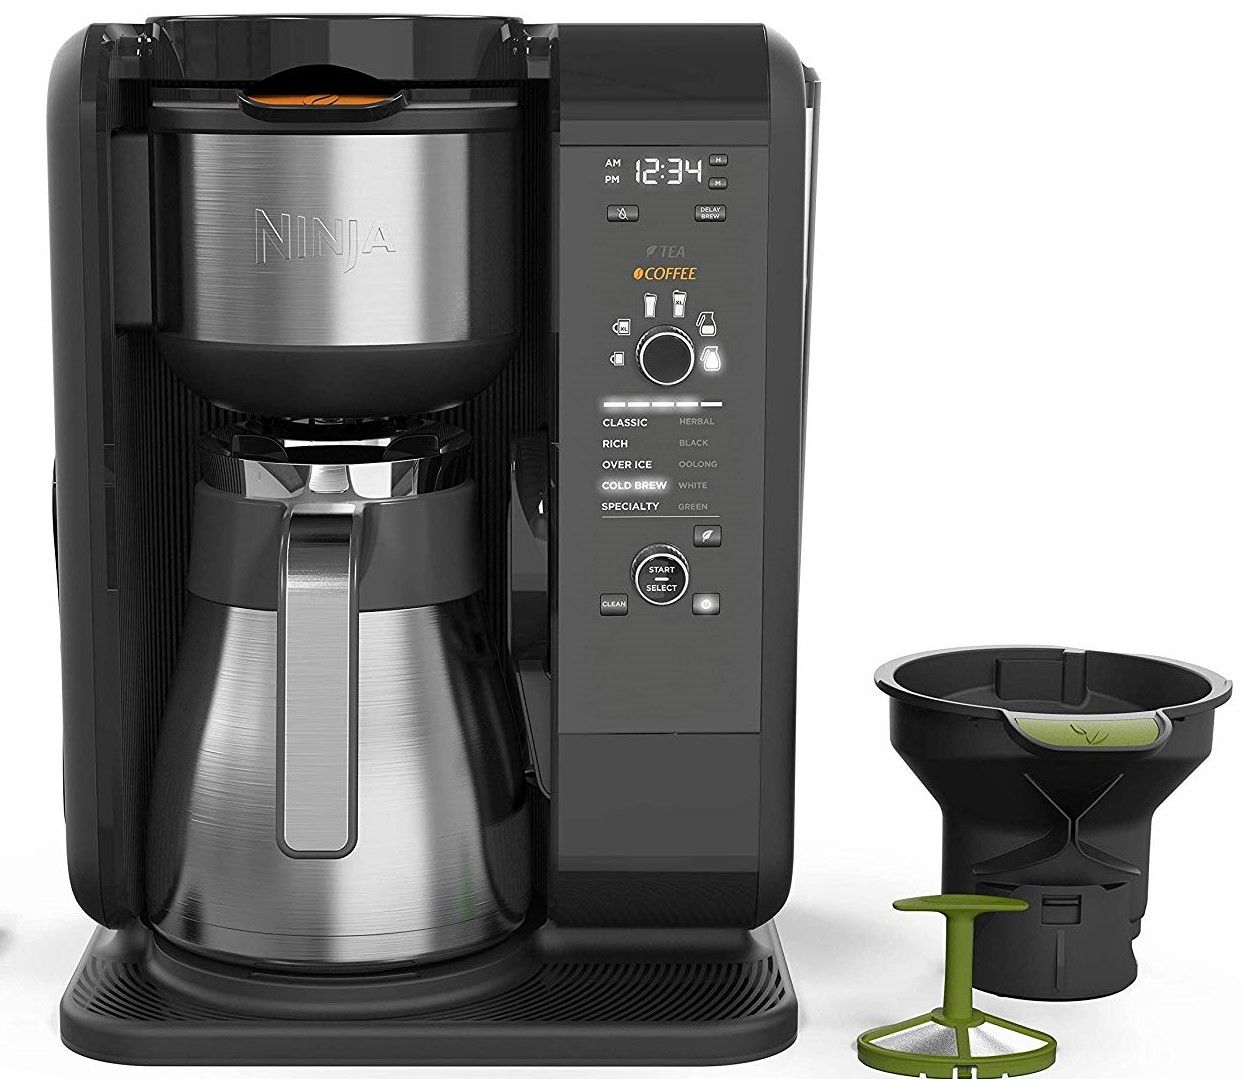 Ninja Hot and Cold coffee brewer